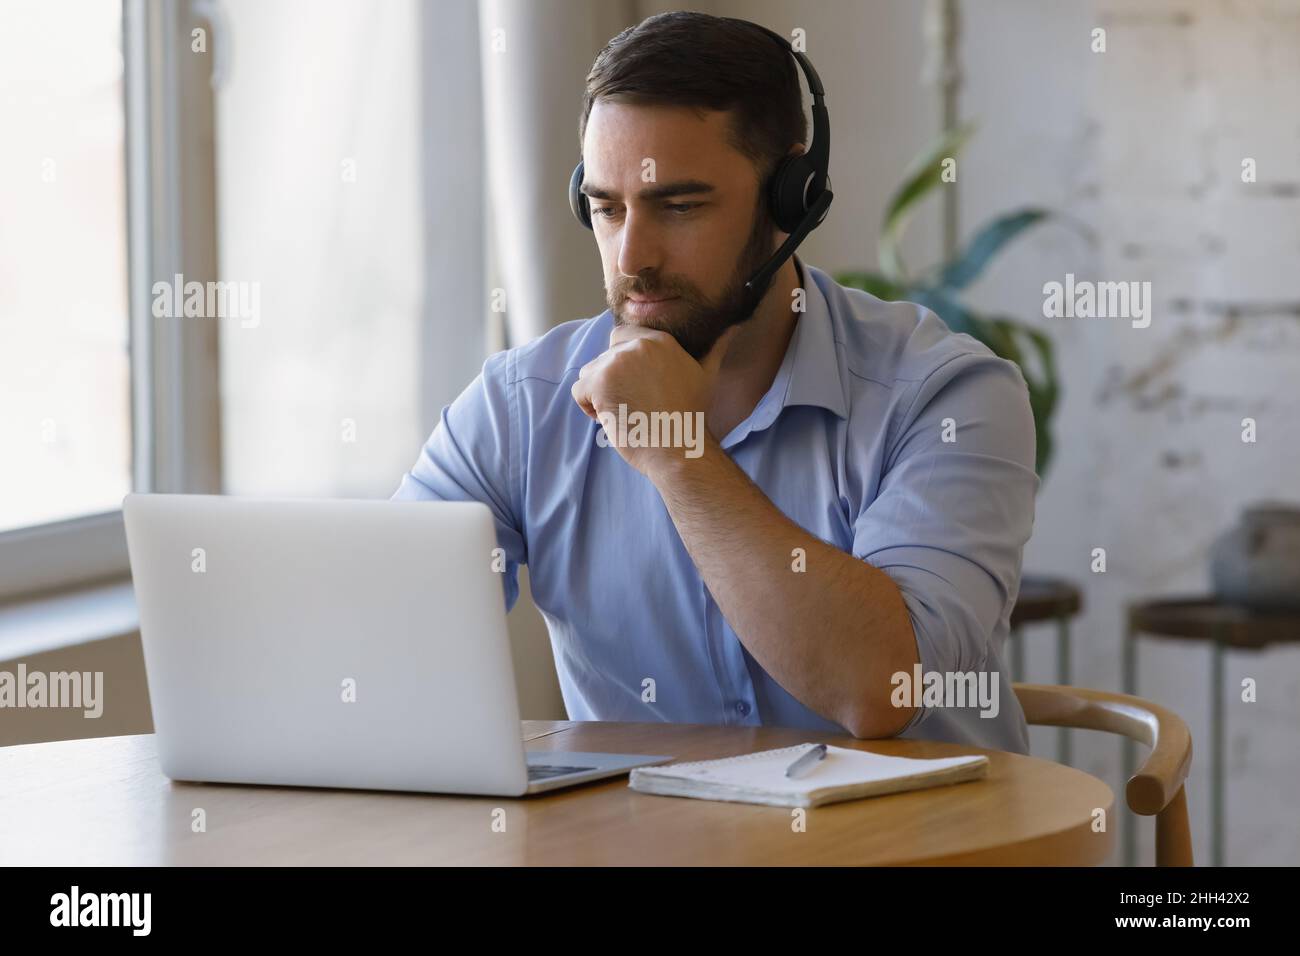 Millennial distant worker in headphones working from home Stock Photo